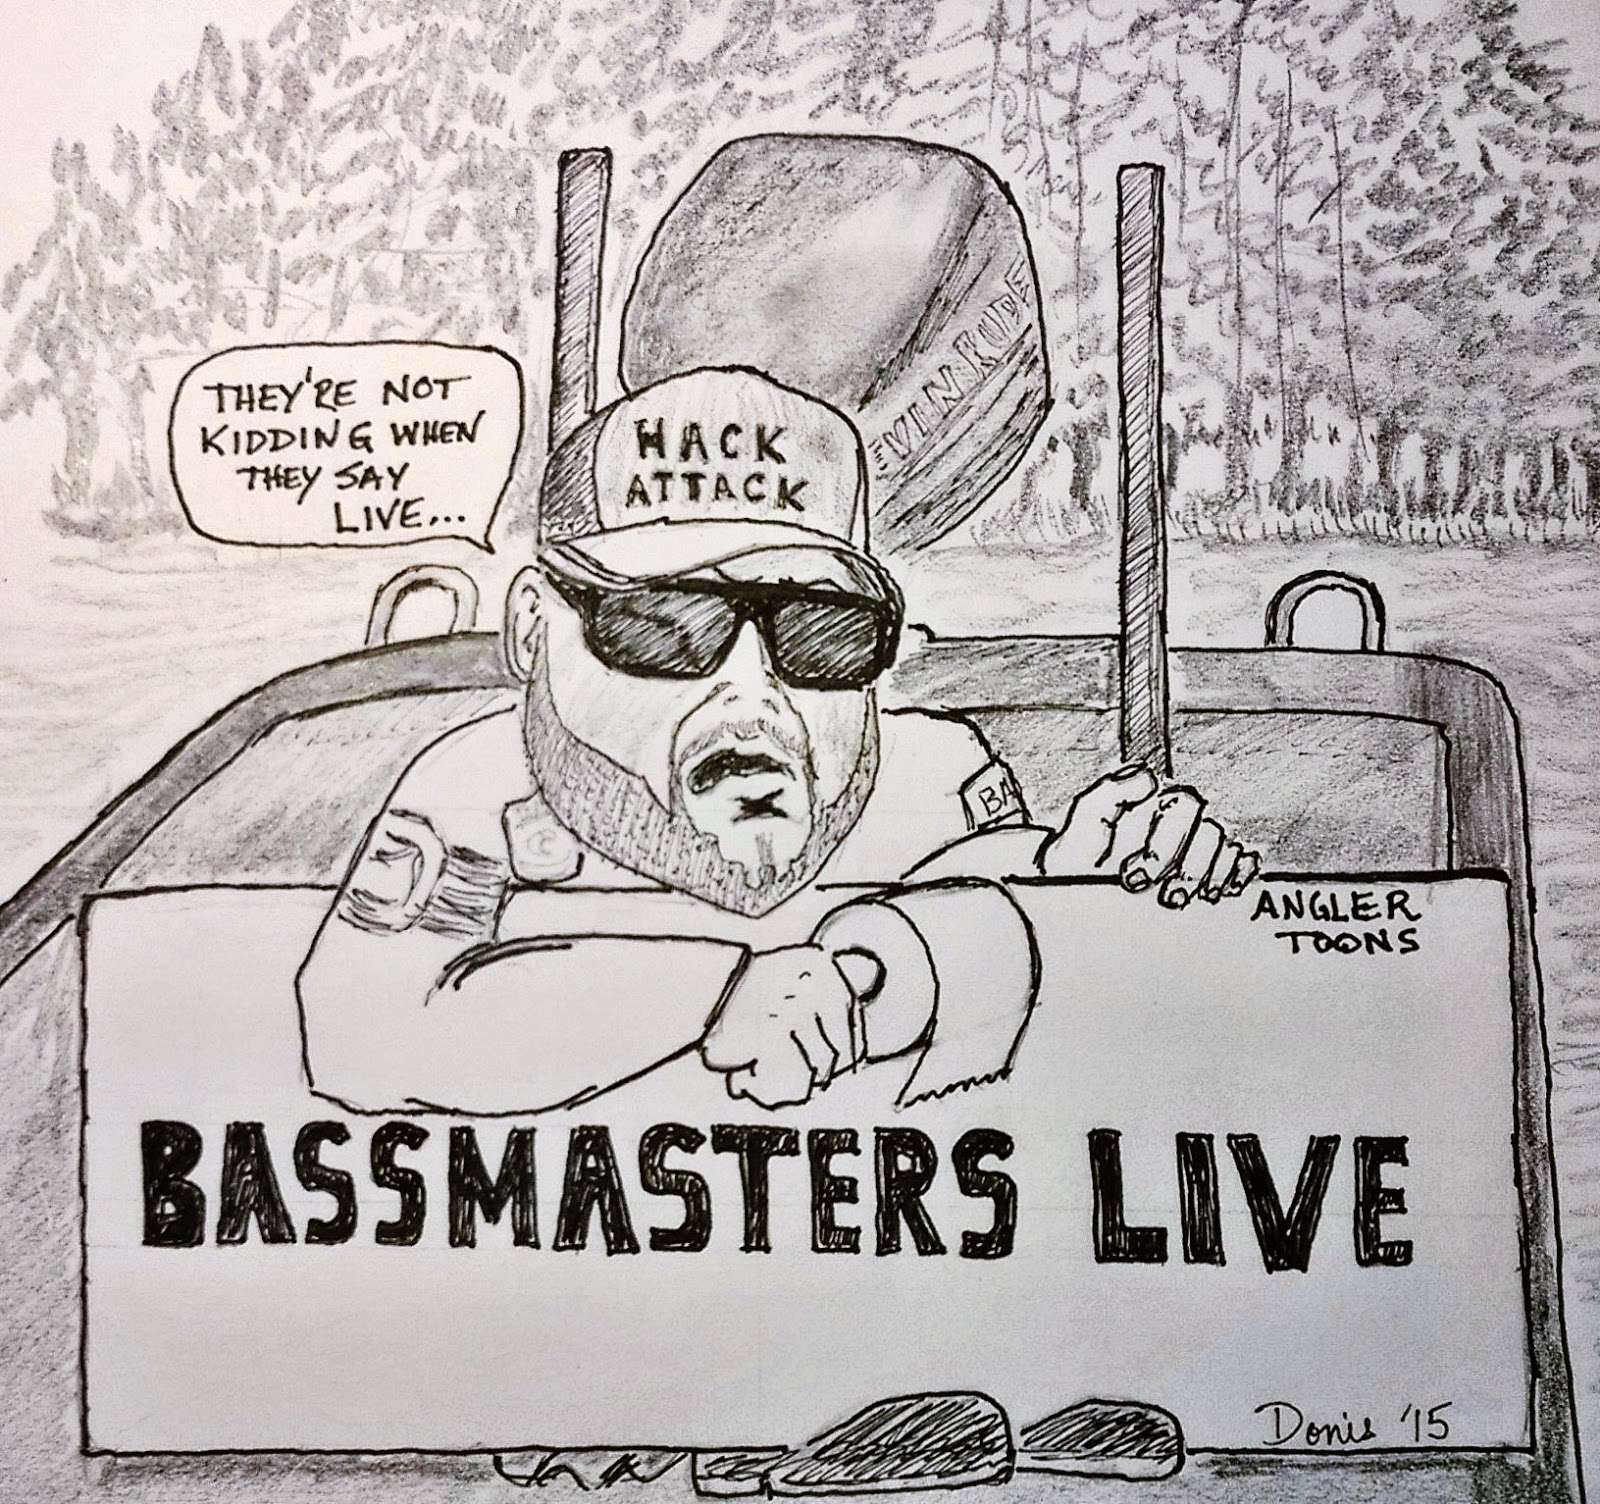 Donis points out that nature calls, even when Bassmaster.com is streaming live.